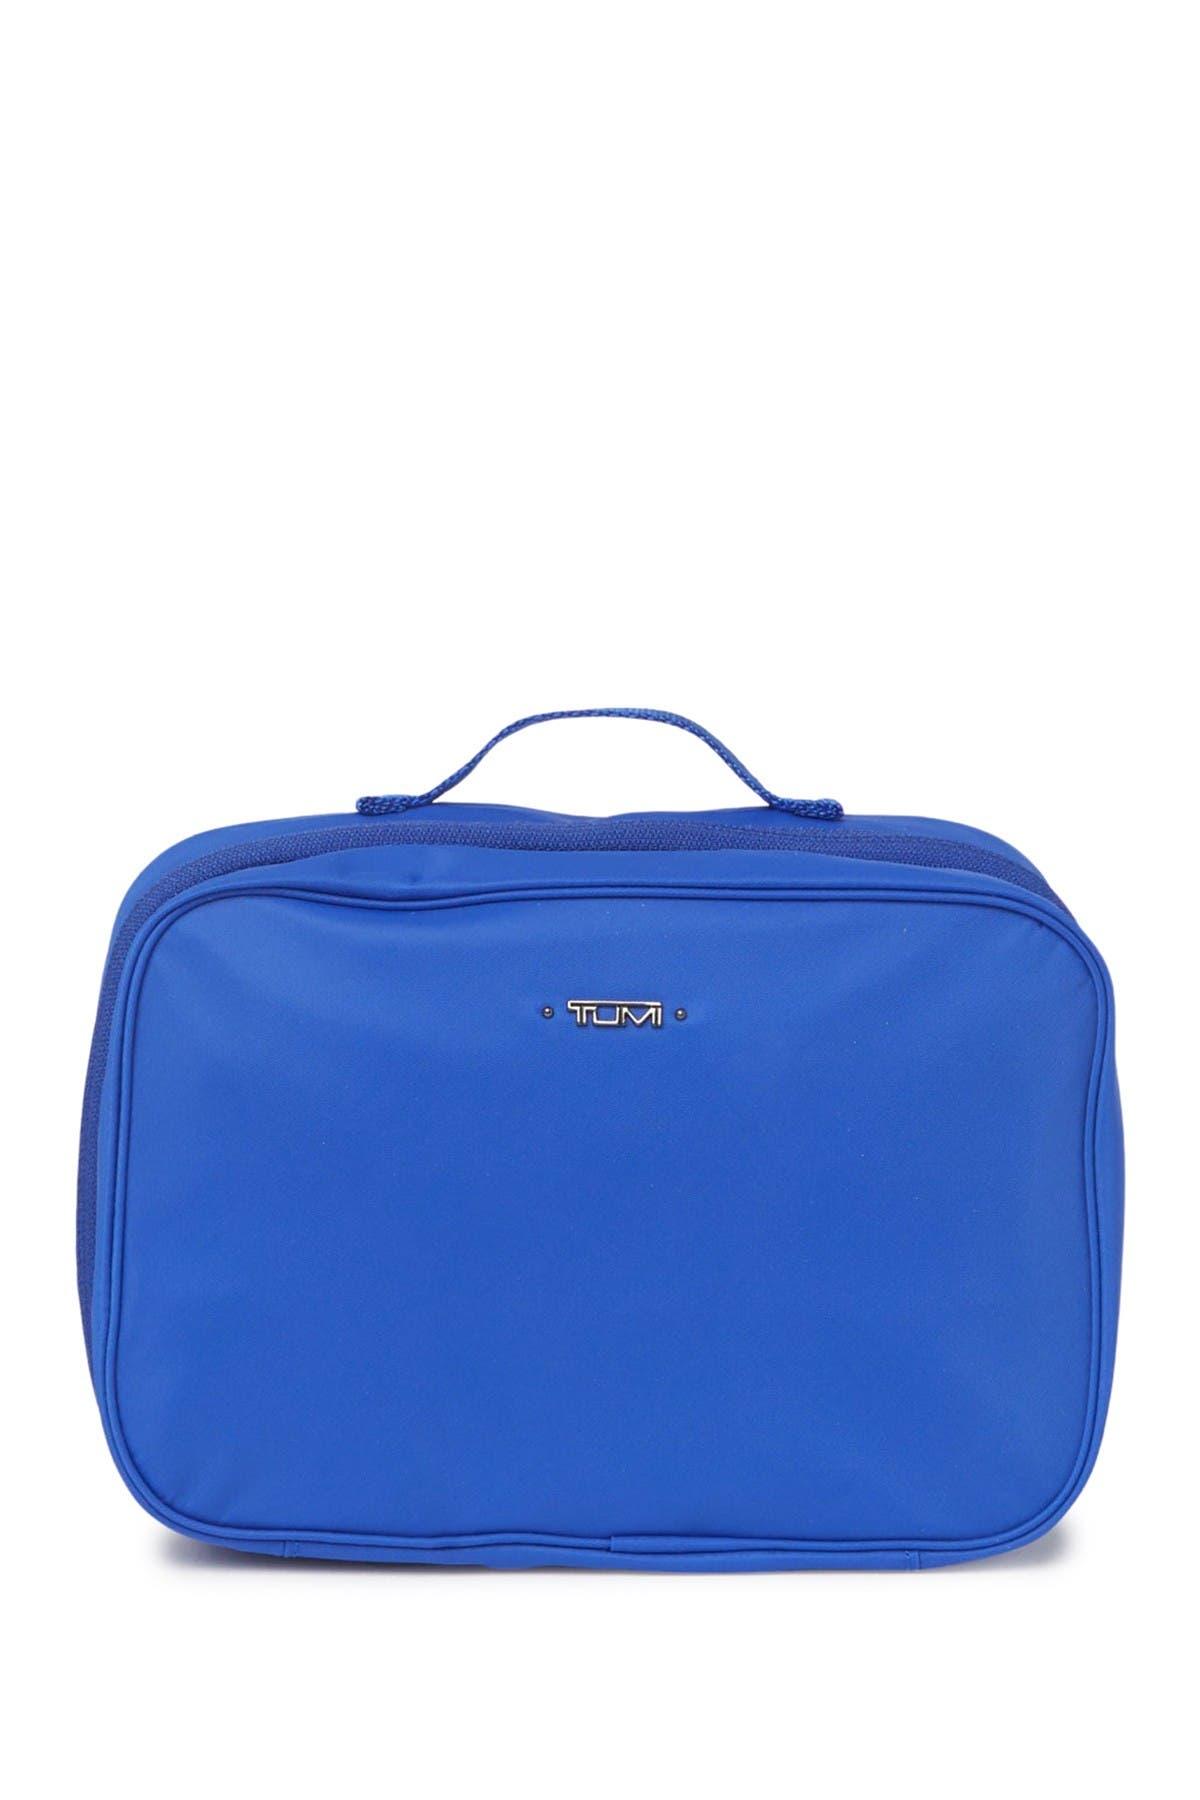 Tumi Trudie Travel Toiletry Kit in Blue | Lyst